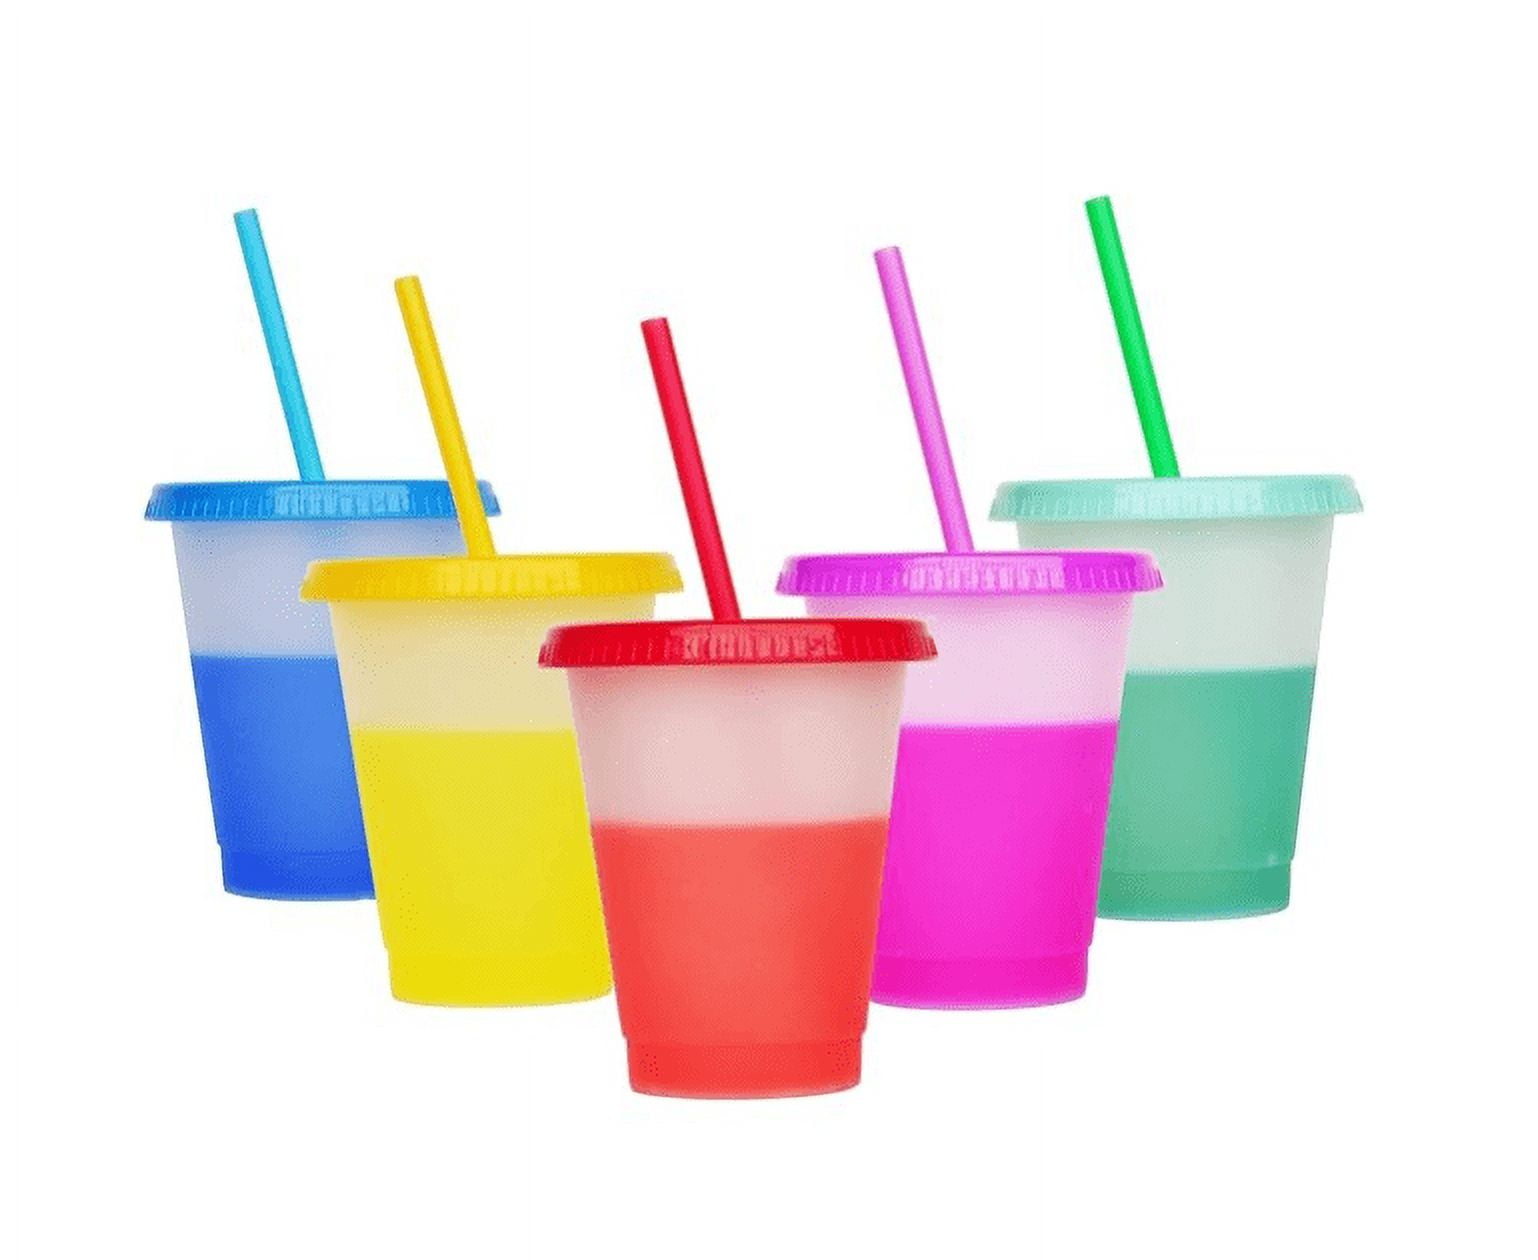 Kids Tumblers with Lids and Straws - 5 Reusable Cups with Lids and Straws,  16oz Glitter Tumbler Cute…See more Kids Tumblers with Lids and Straws - 5